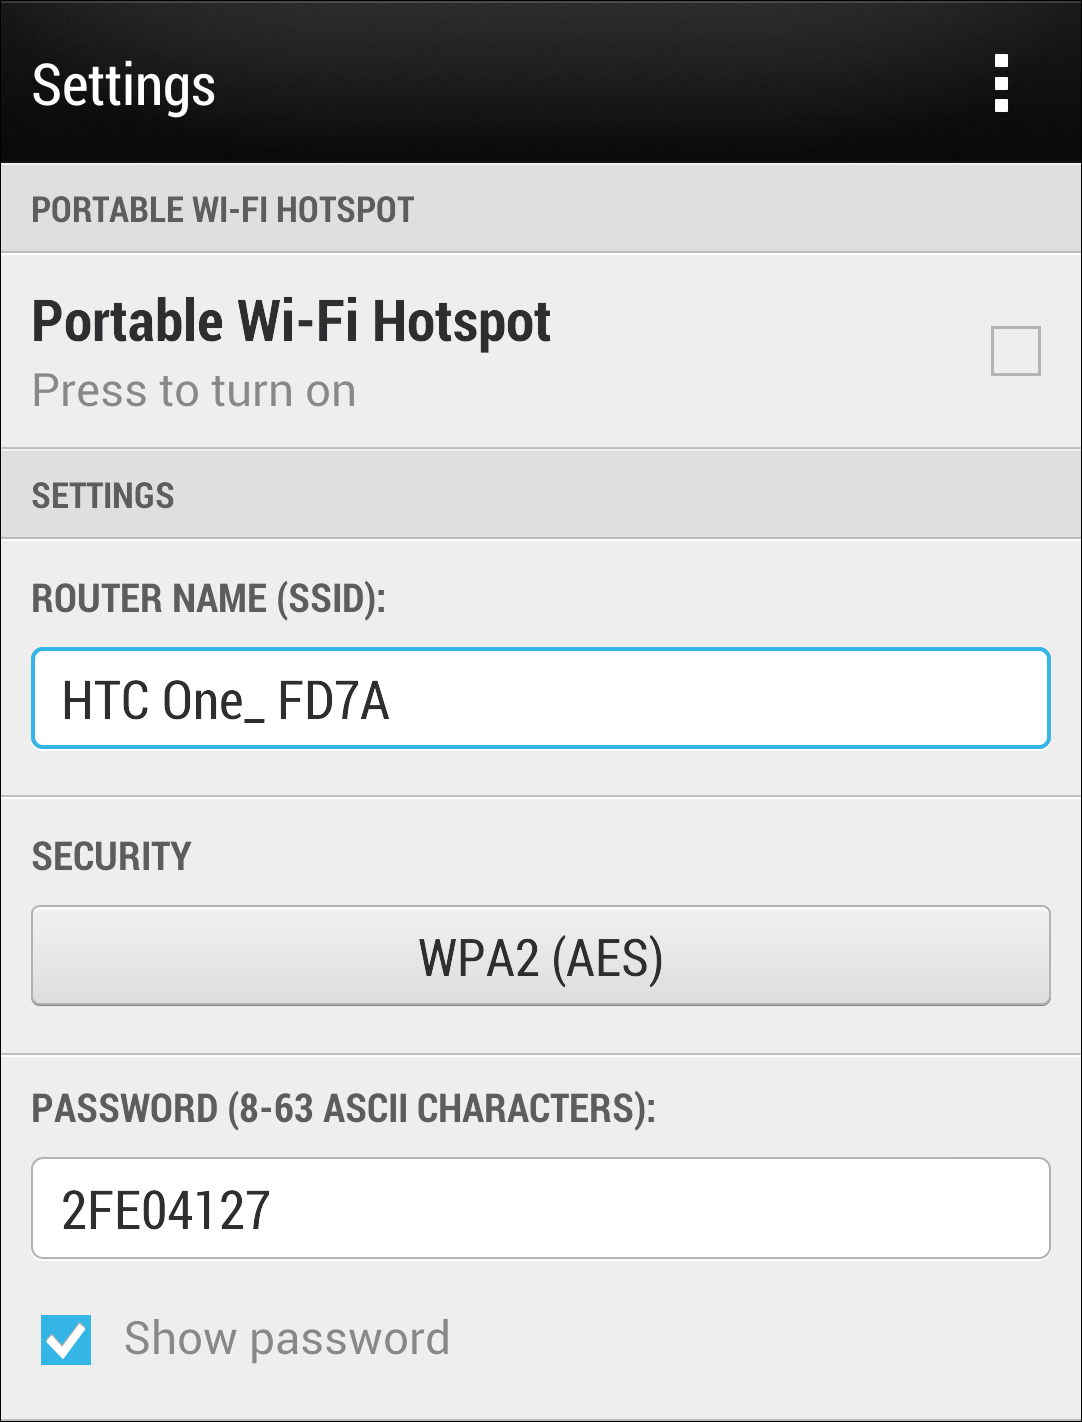 Figure 41: Android’s Portable Wi-Fi Hotspot allows more settings than iOS, including choosing a security method.